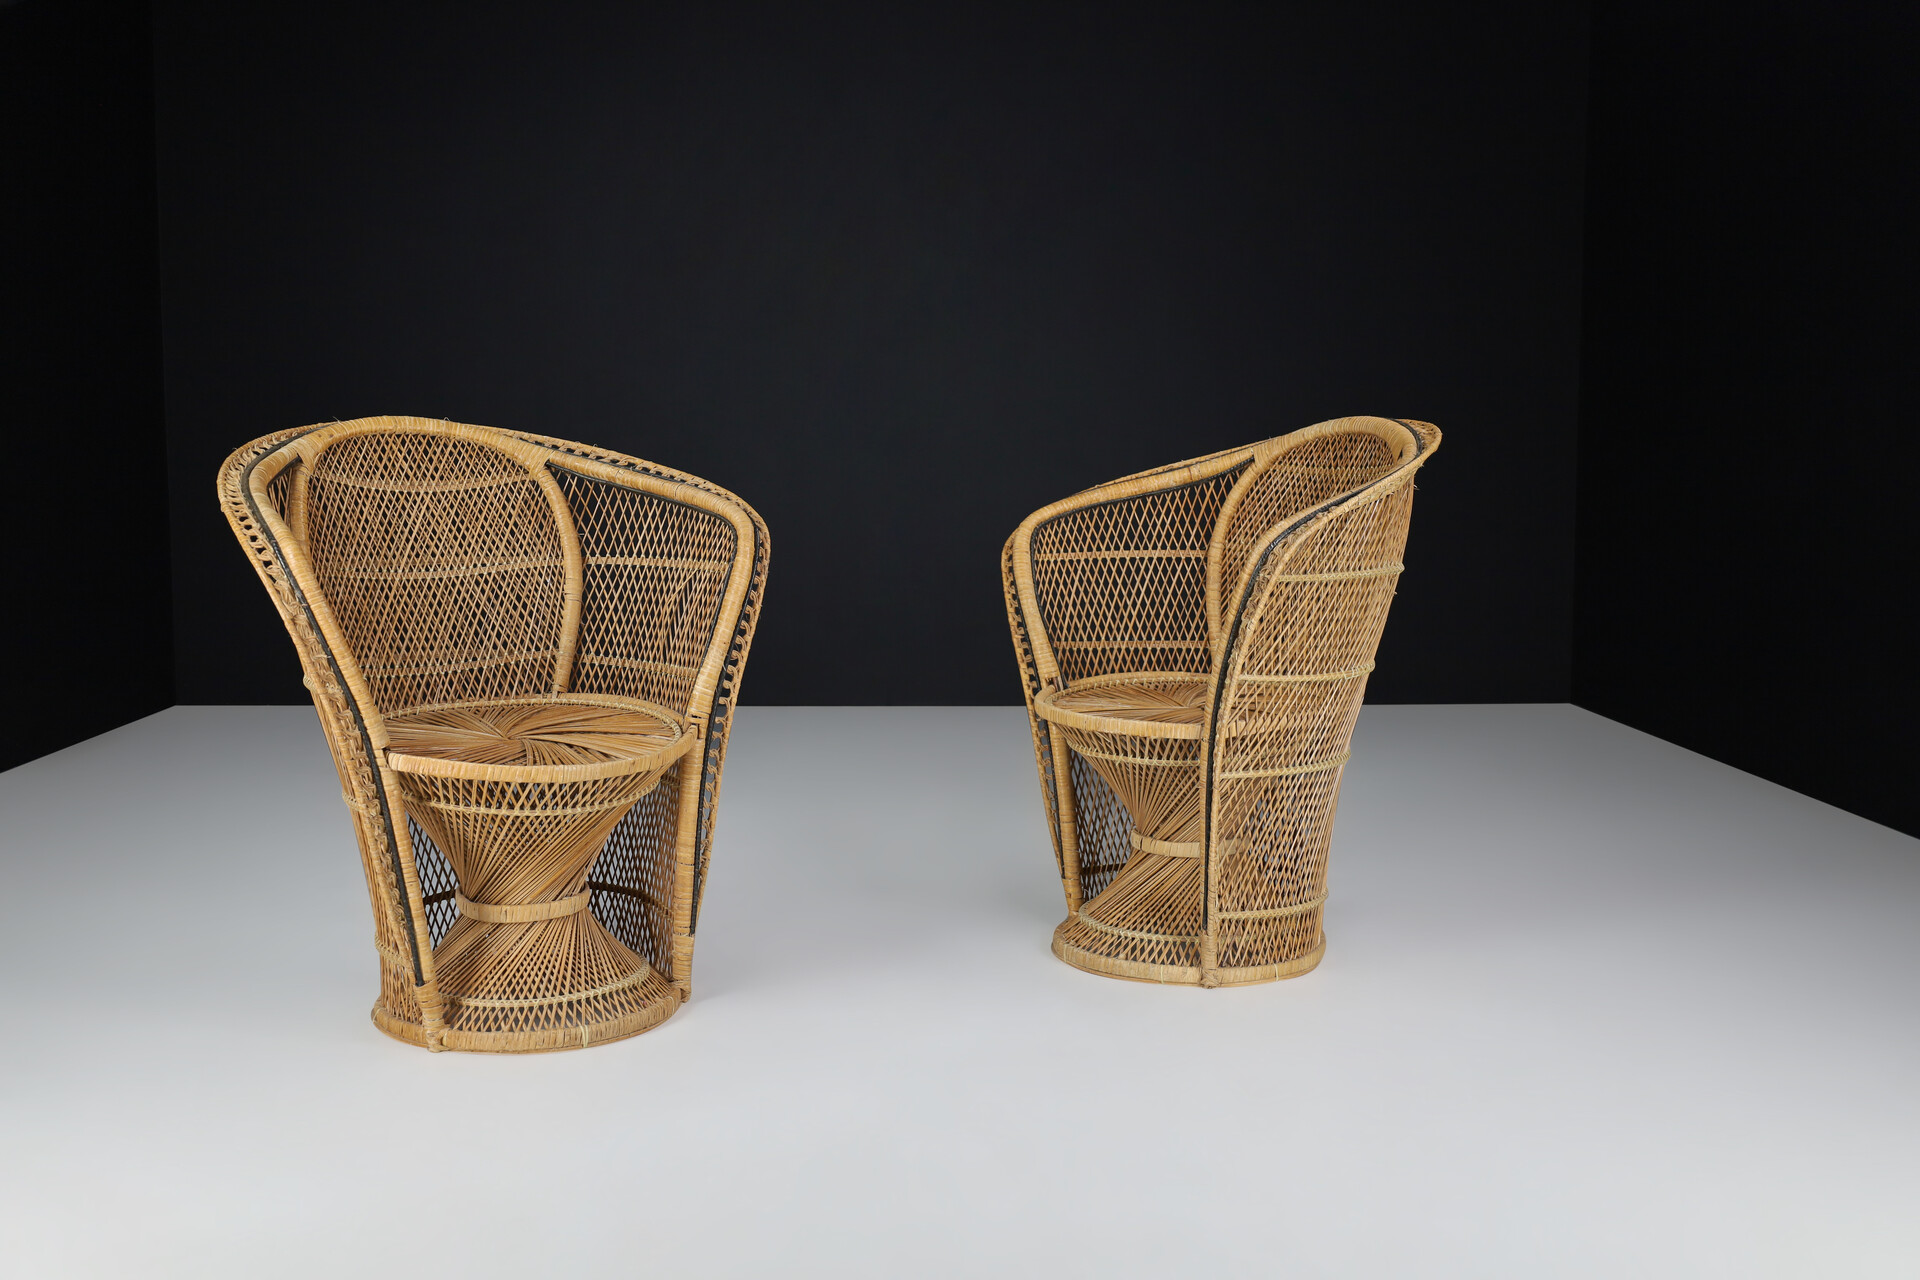 Bohemian Emmanuelle Wicker Peacock Chairs, France 1950s Mid-20th century